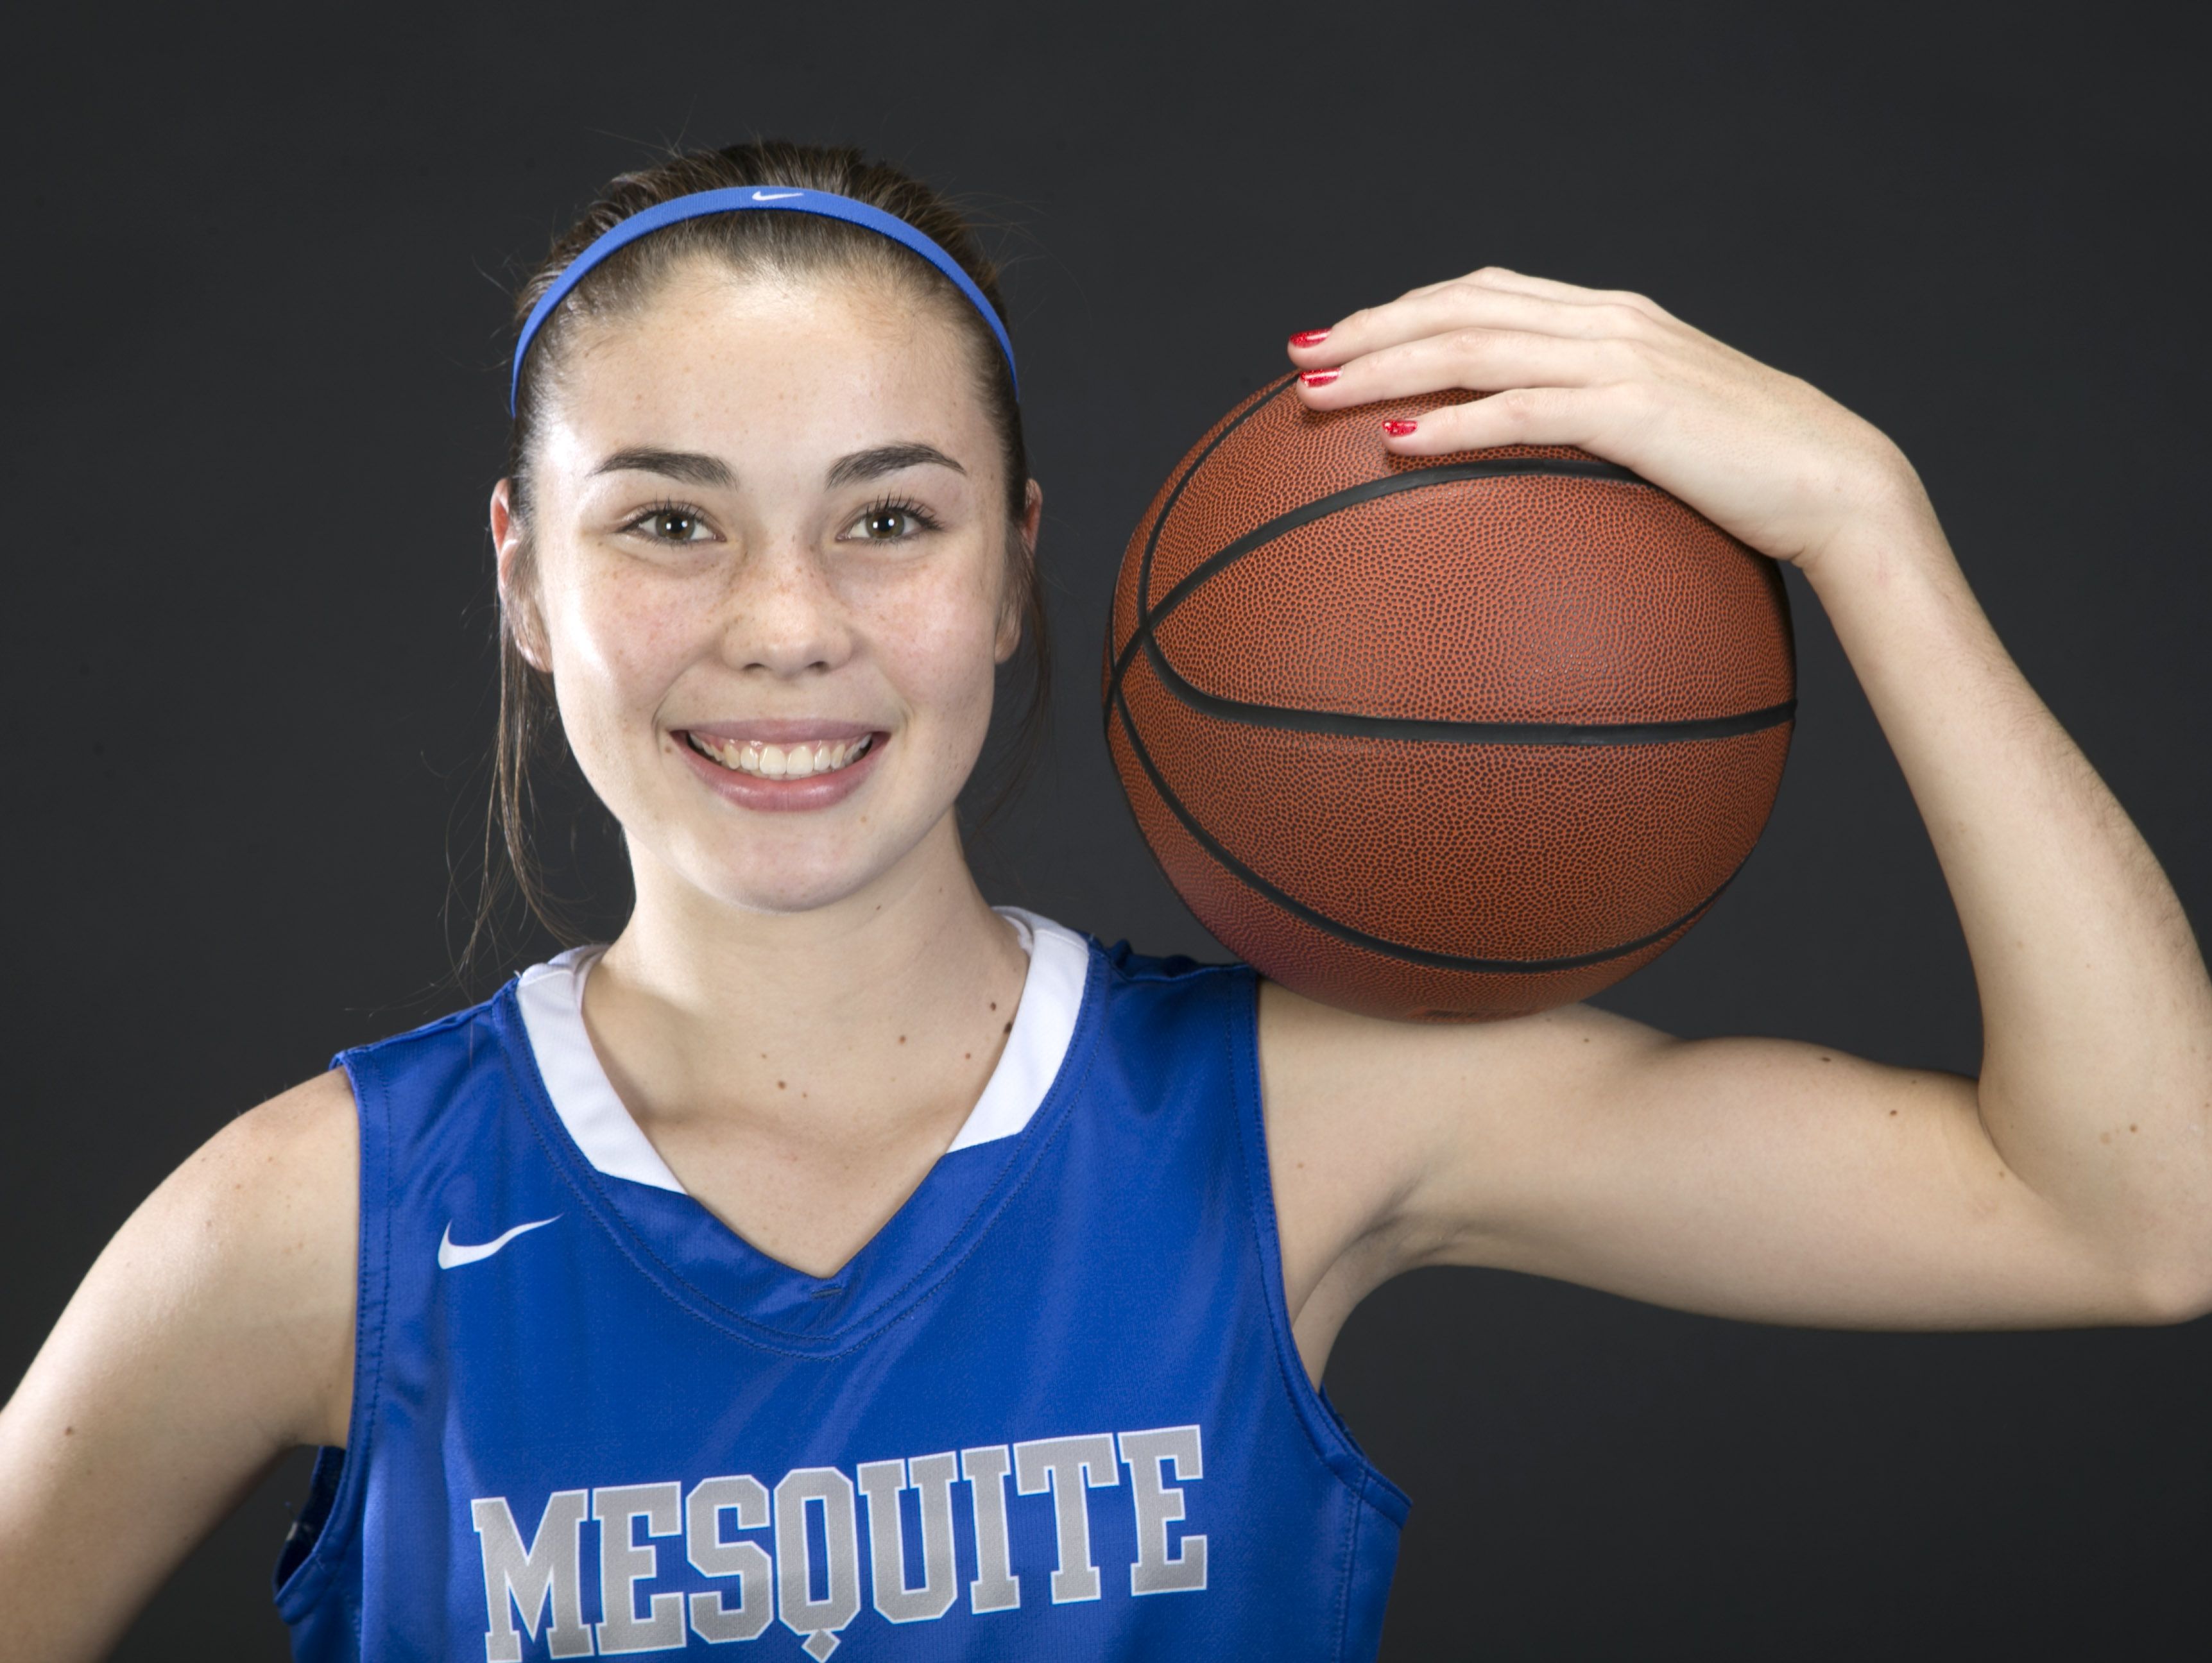 Gilbert Mesquite basketball player Shaylee Gonzales is the Arizona Sports Awards December Athlete of the Month.